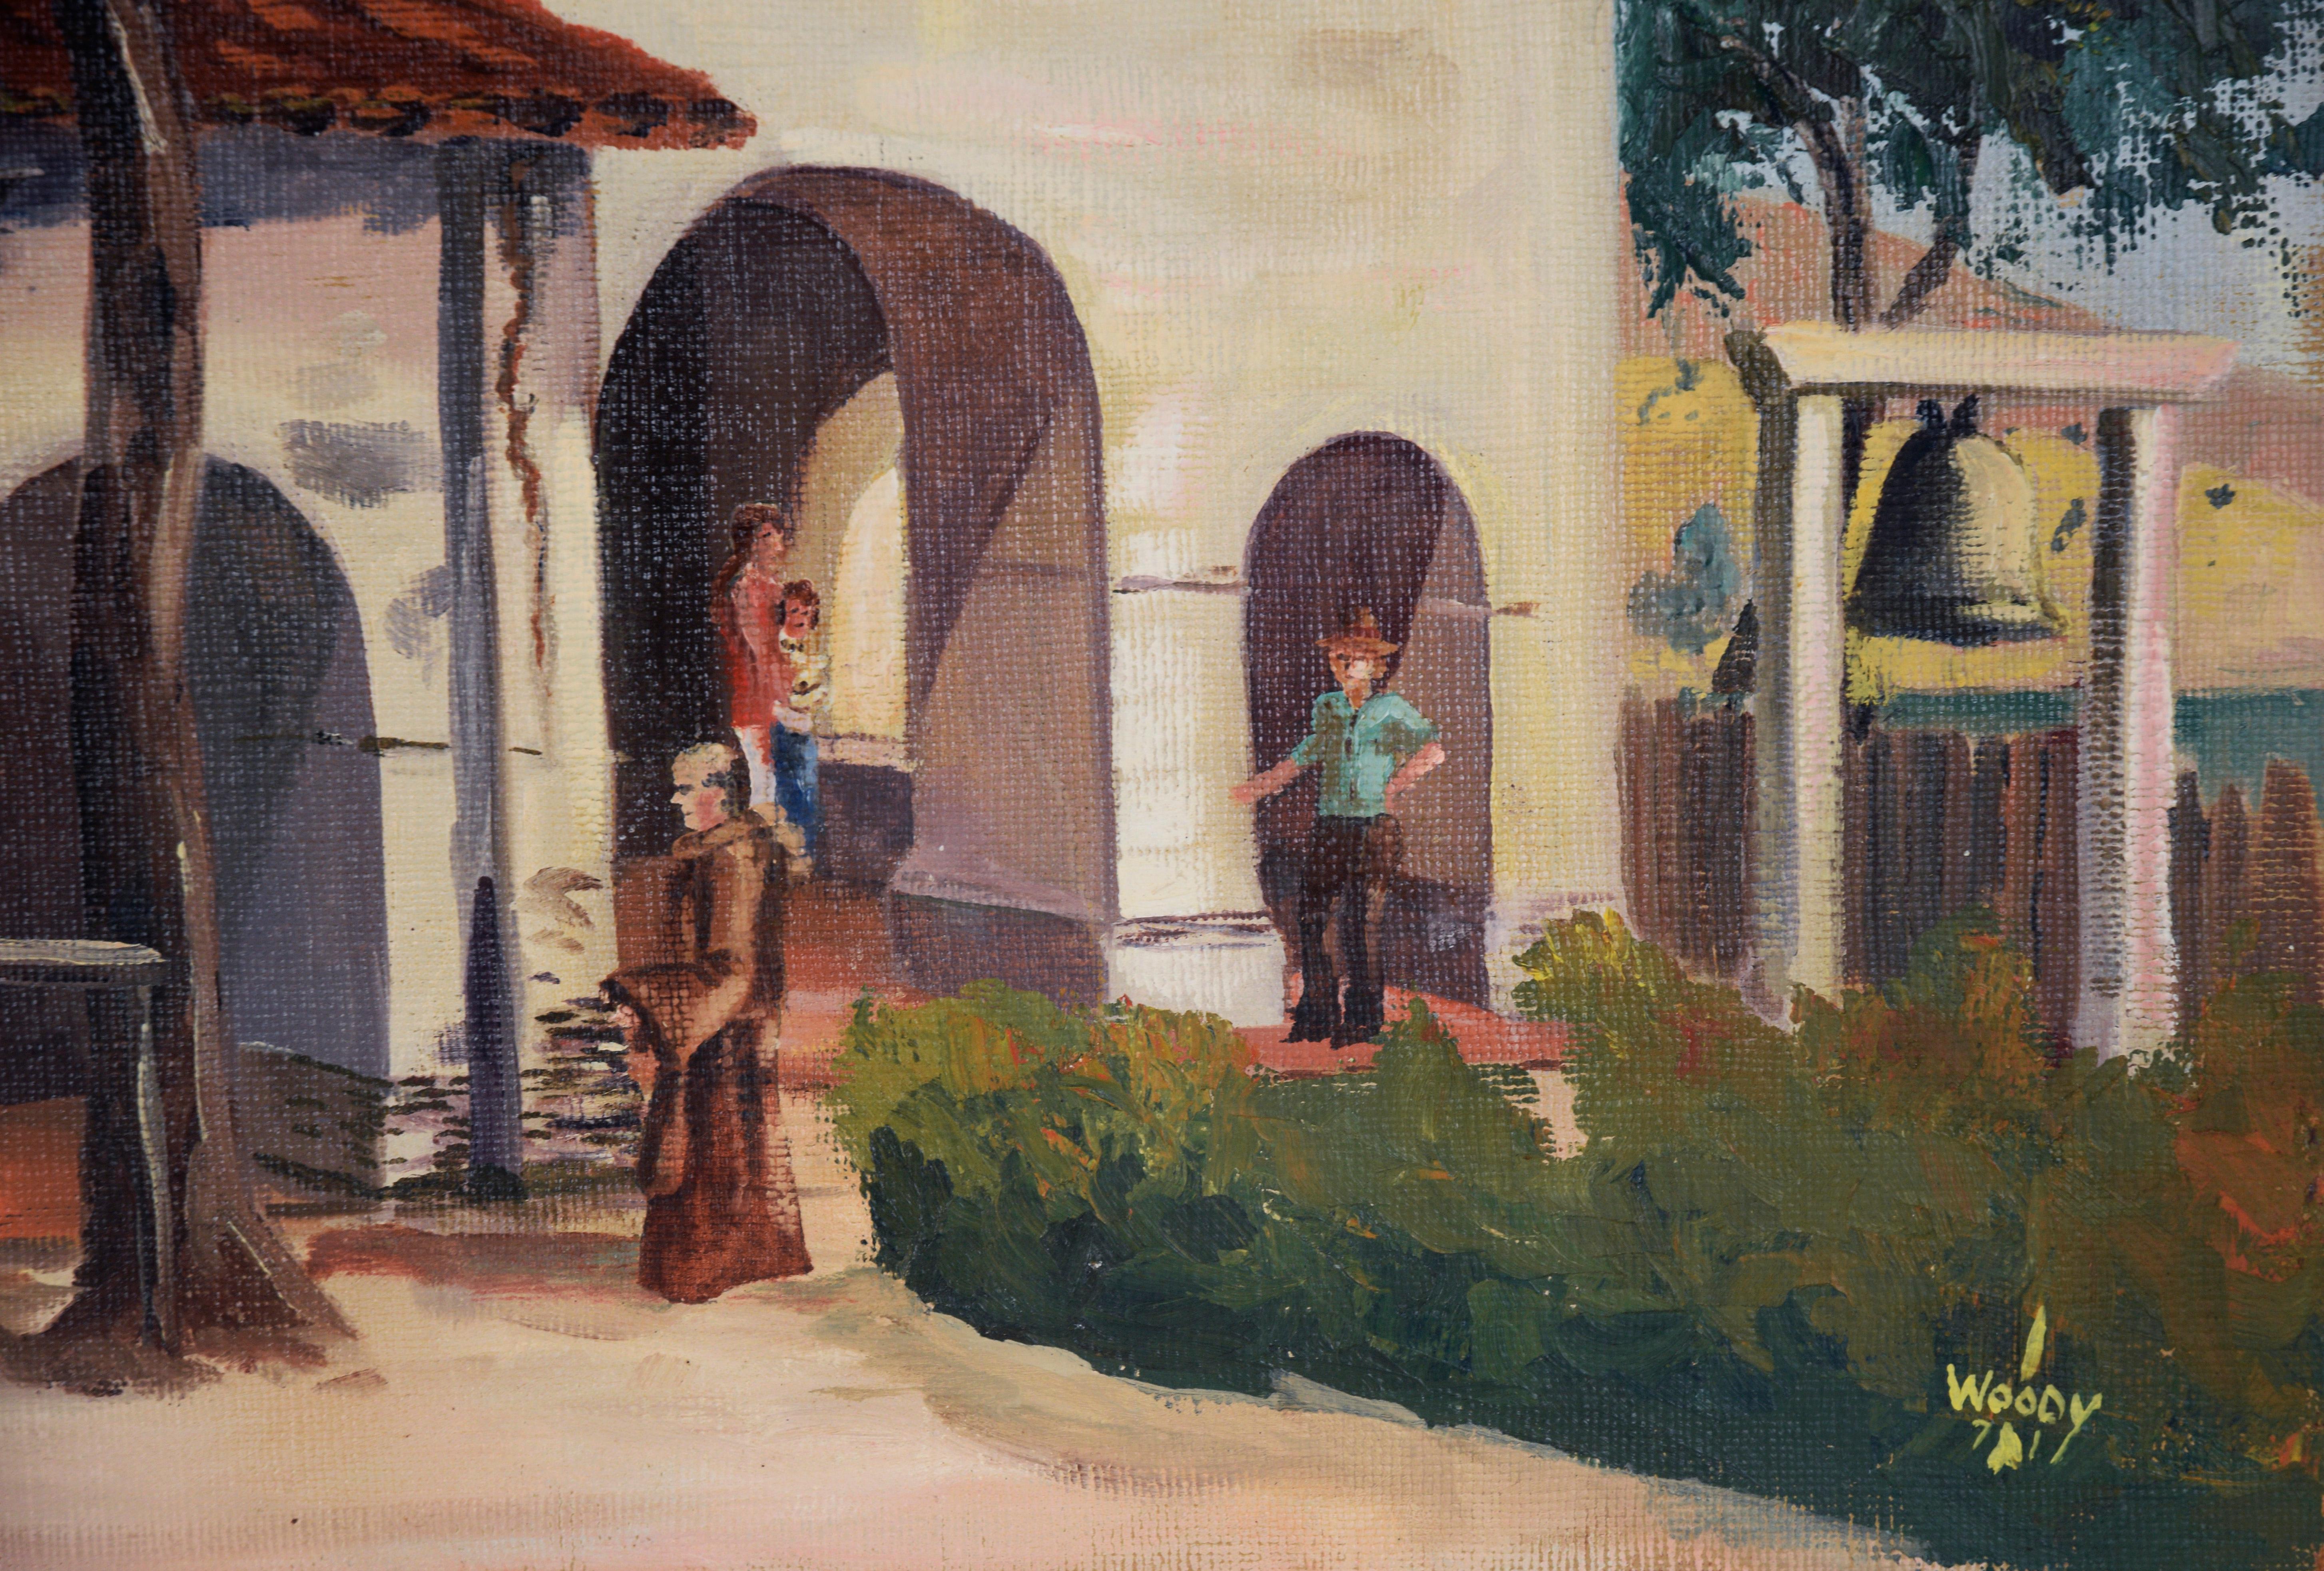 Mission San Juan Bautista, 1971 - Original Oil Painting

Oil painting of Mission San Juan Bautista by Gorman Woody (American, 1907-2000). The viewer looks towards the front of the Mission, where vibrant green trees stand tall. People can be seen